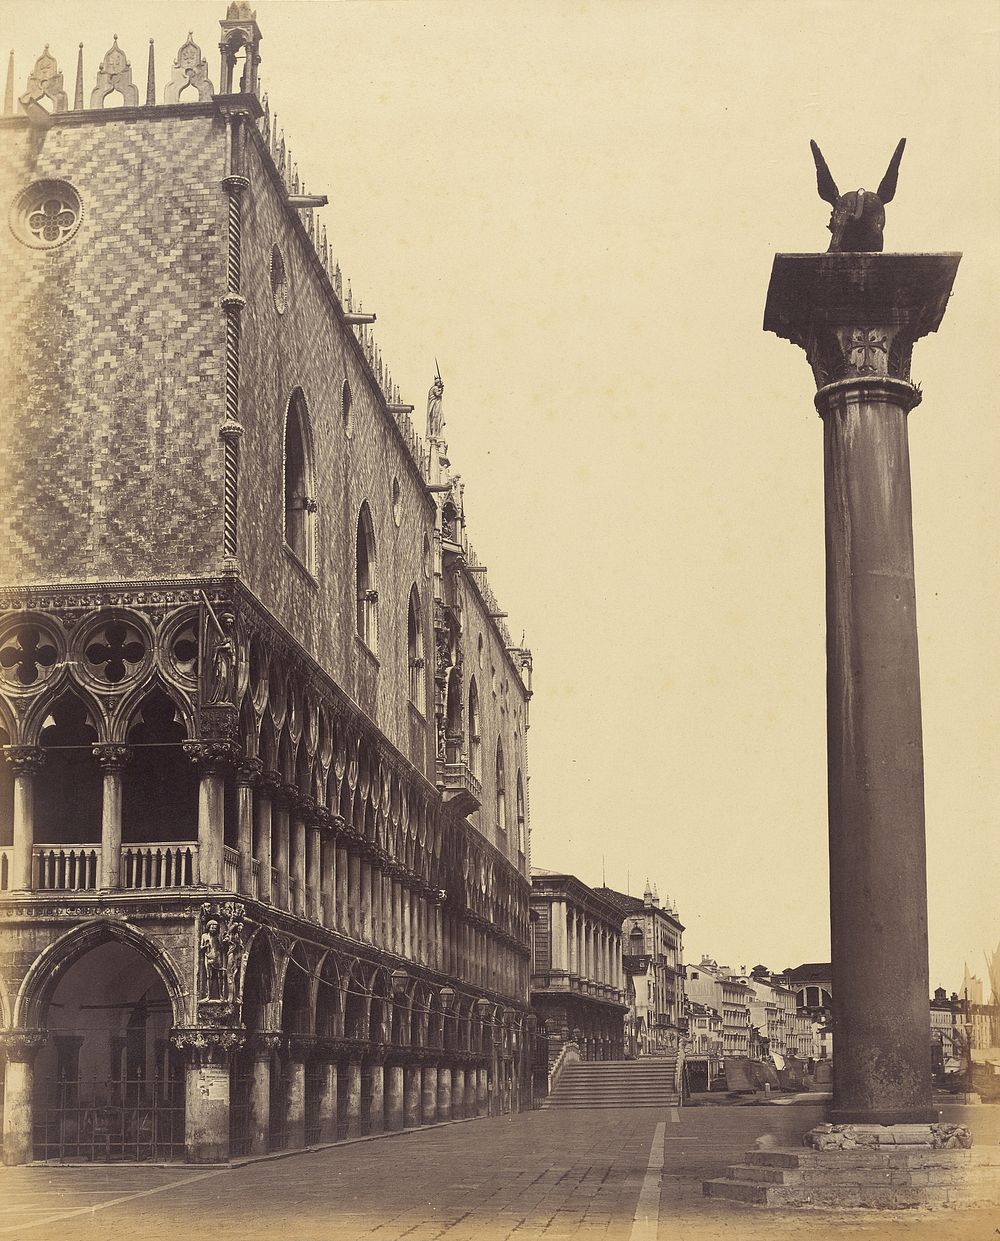 Venice, Ducal Palace and Piazzetta column by Antonio Perini